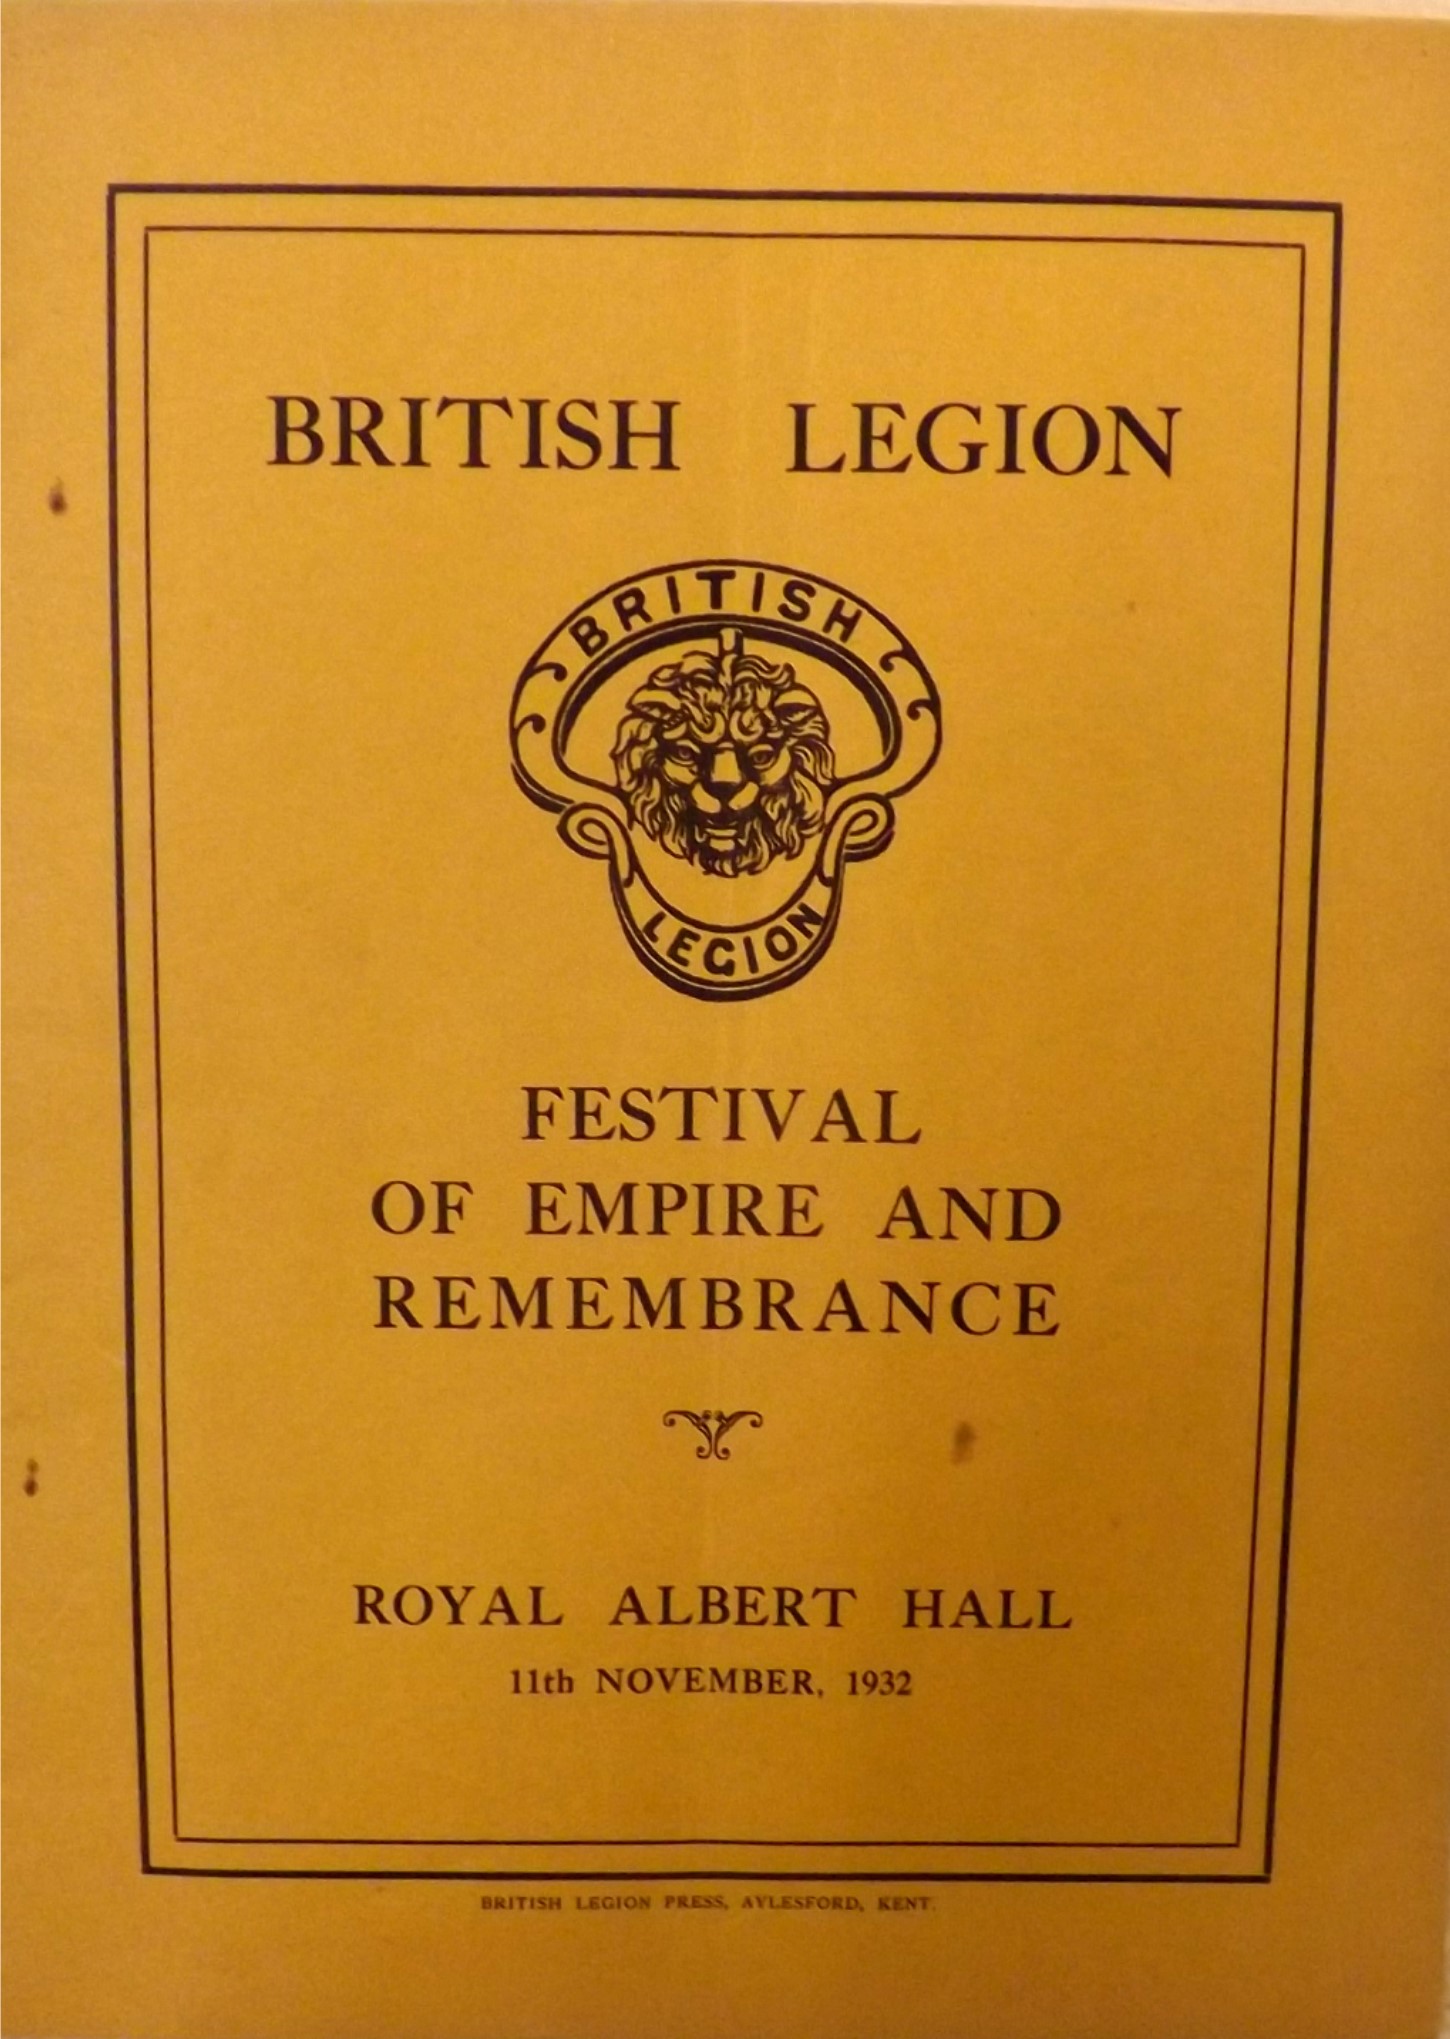 A programme for the Festival of Empire and Remembrance at the Royal Albert Hall, 11th. November, 1932.